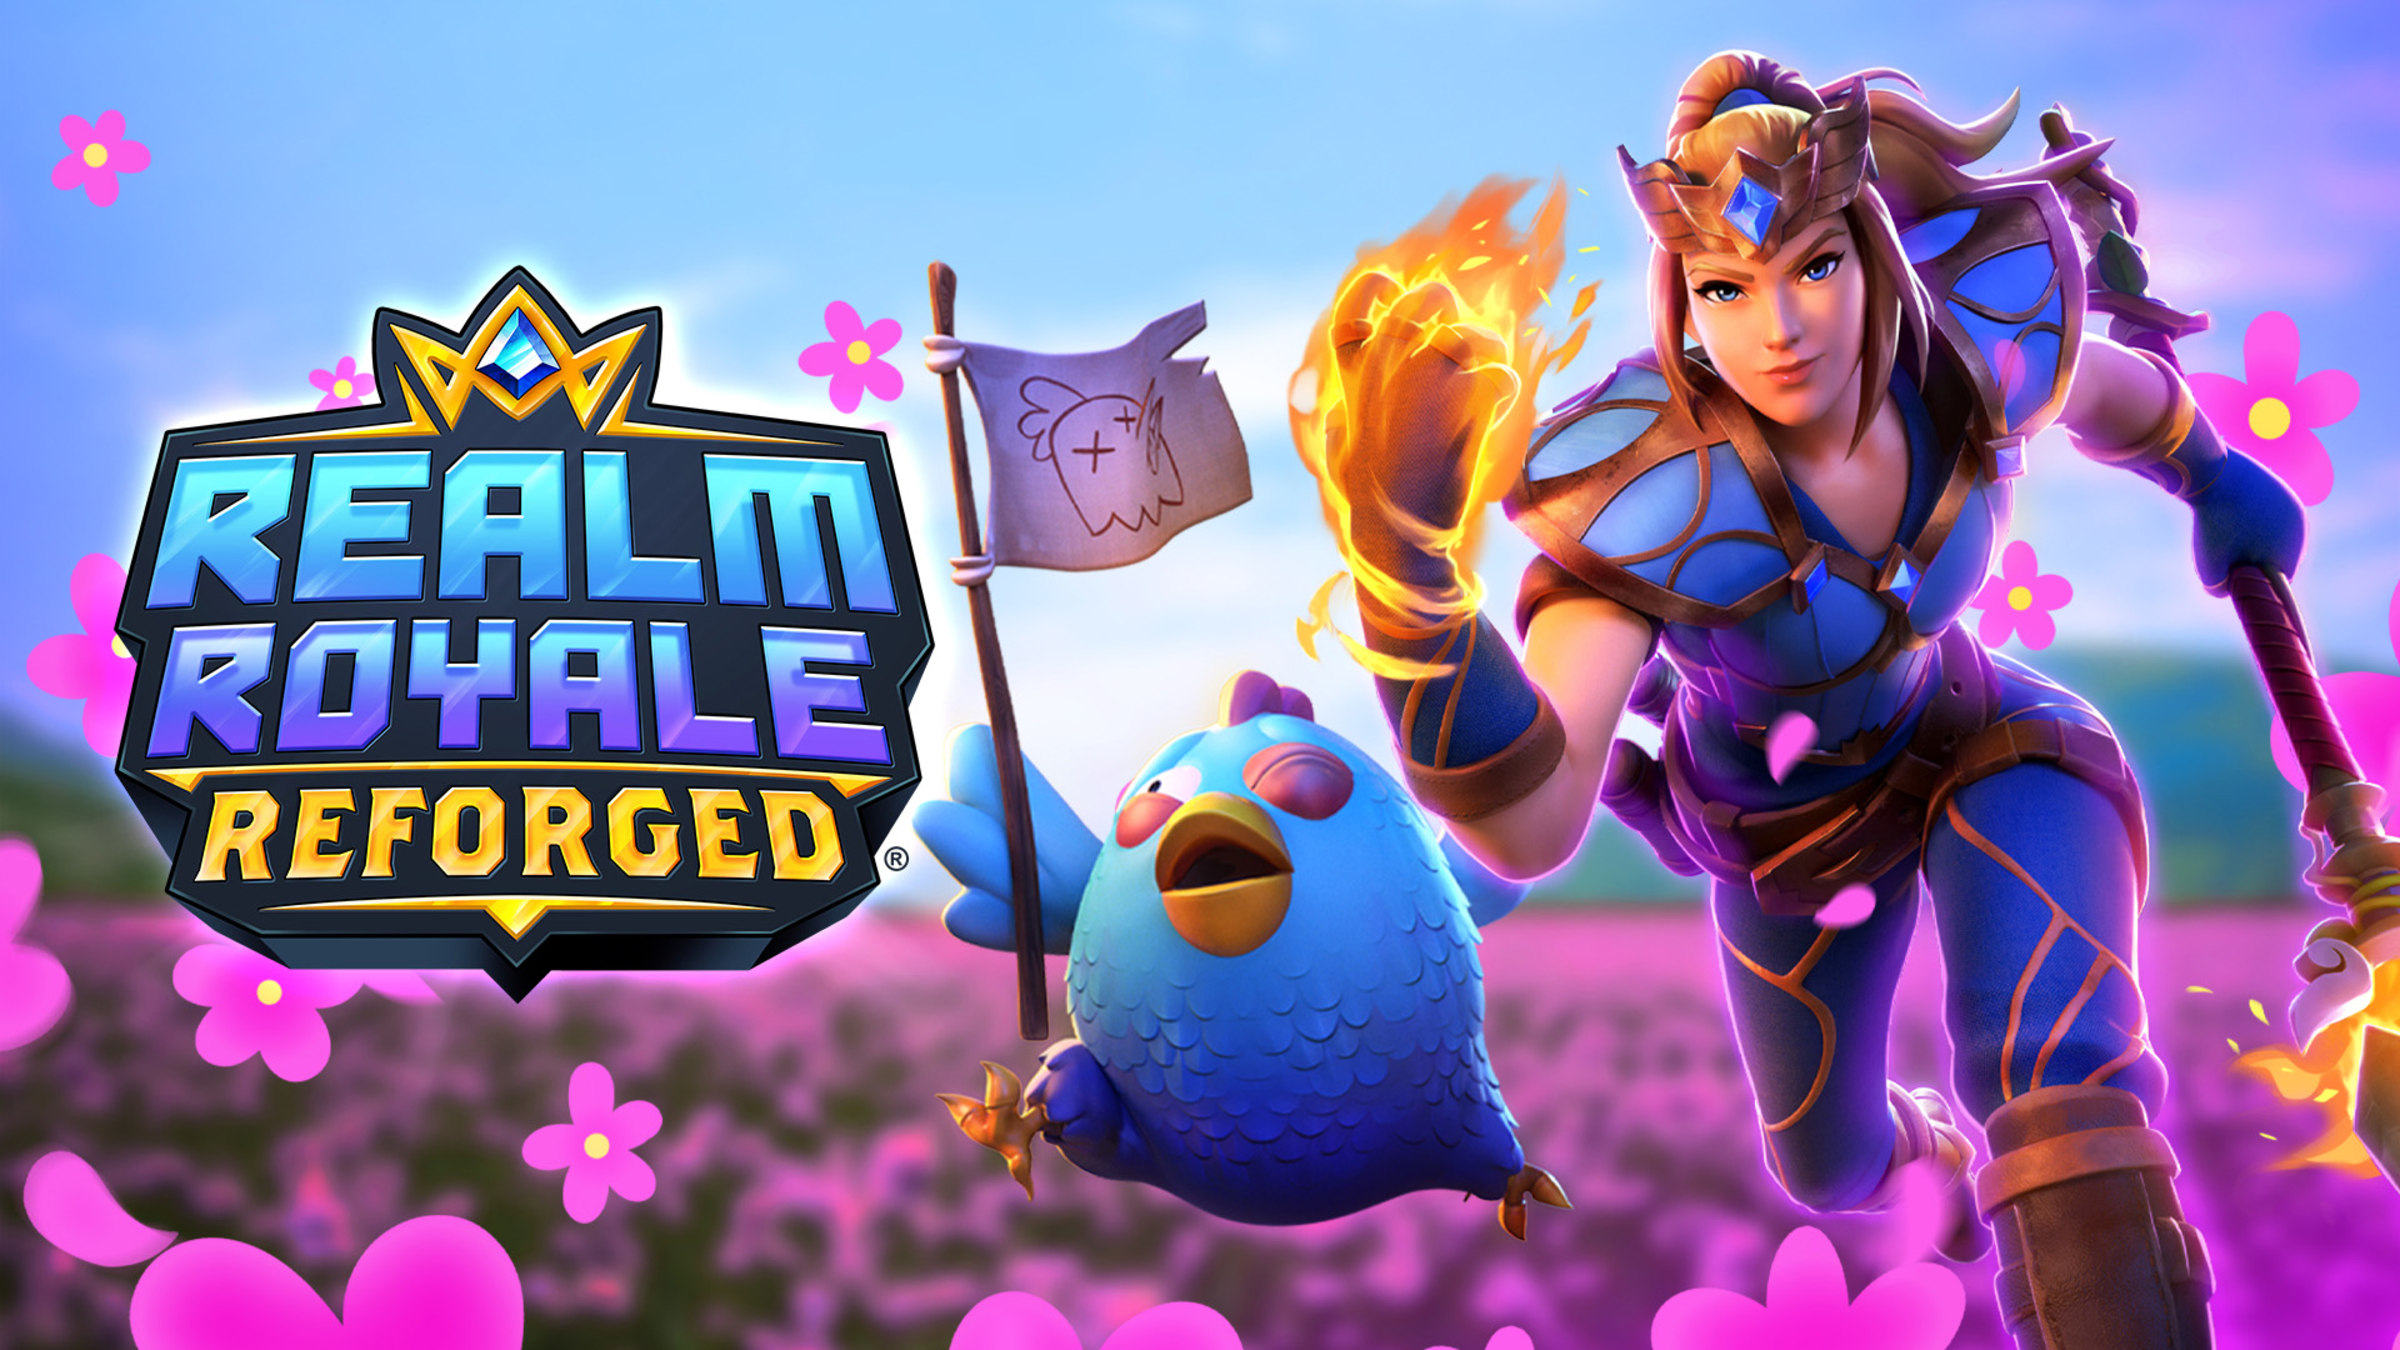 Realm Royale Reforged on X: For those of you who have stayed with us since  the beginning, we have a thank you gift you can use while reforging  yourself on the battlefield!